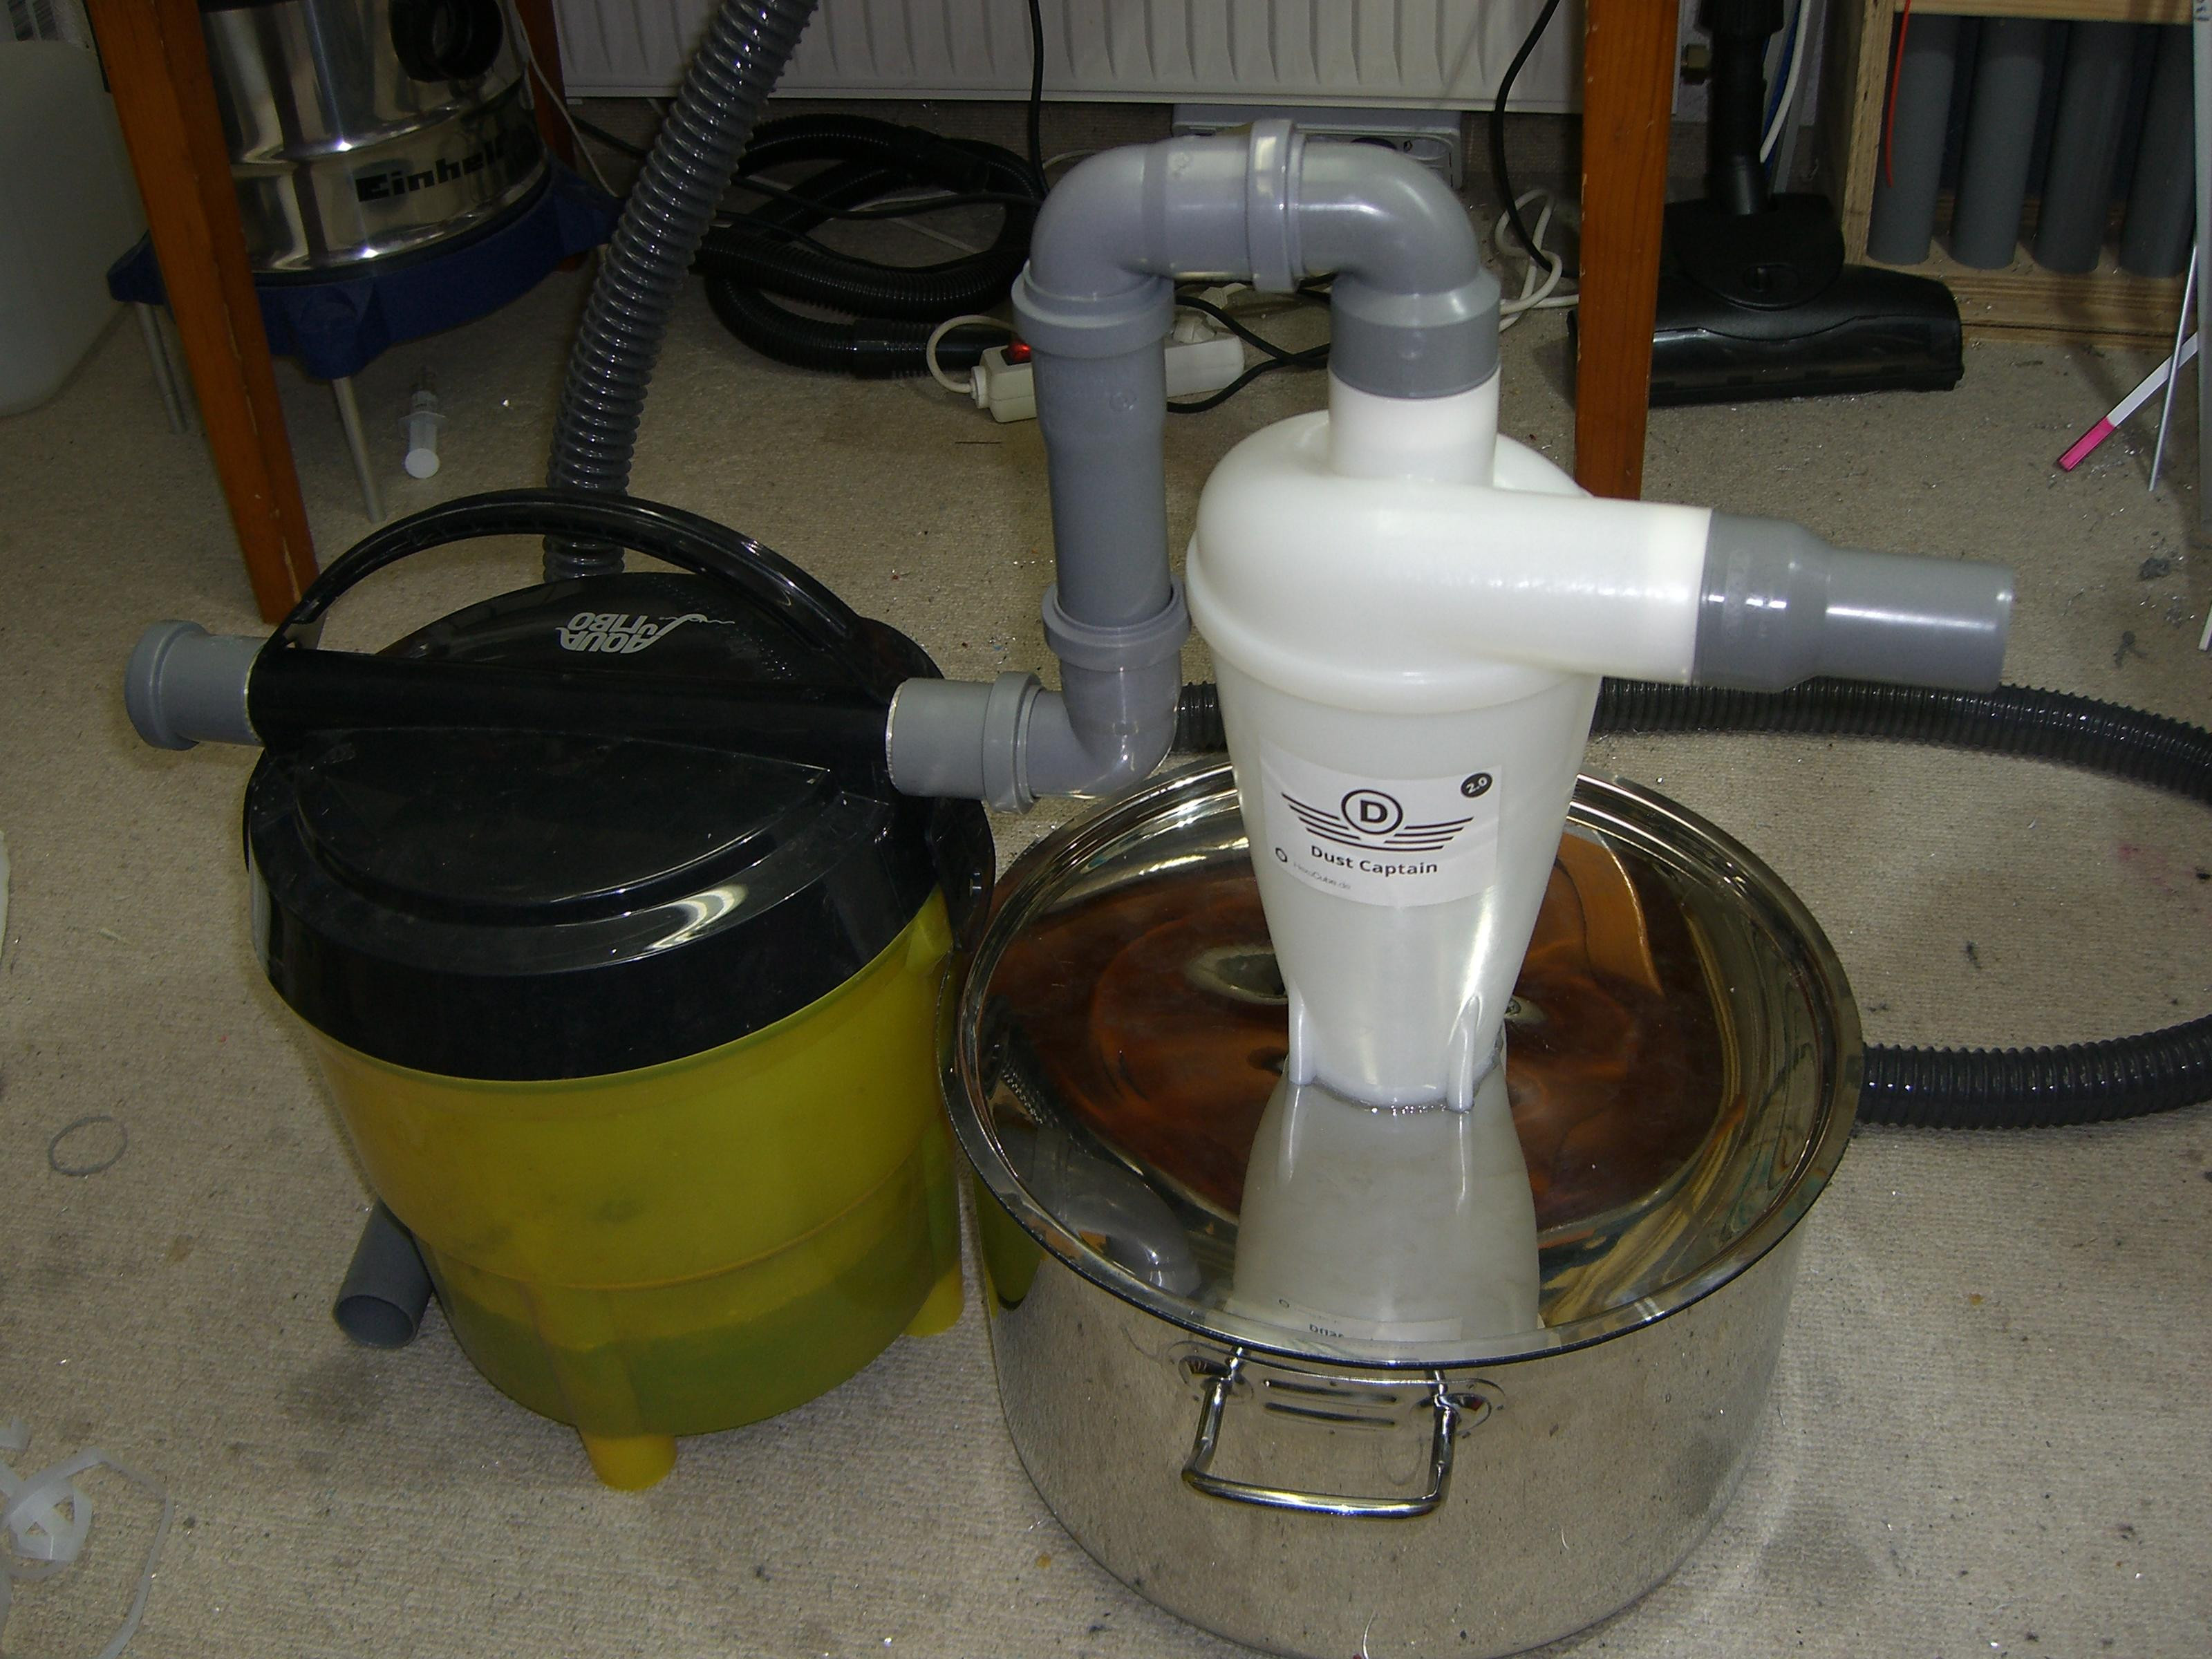 Best ideas about DIY Dust Cyclone
. Save or Pin Dust Captain cyclone separator and DIY water prefilter for Now.